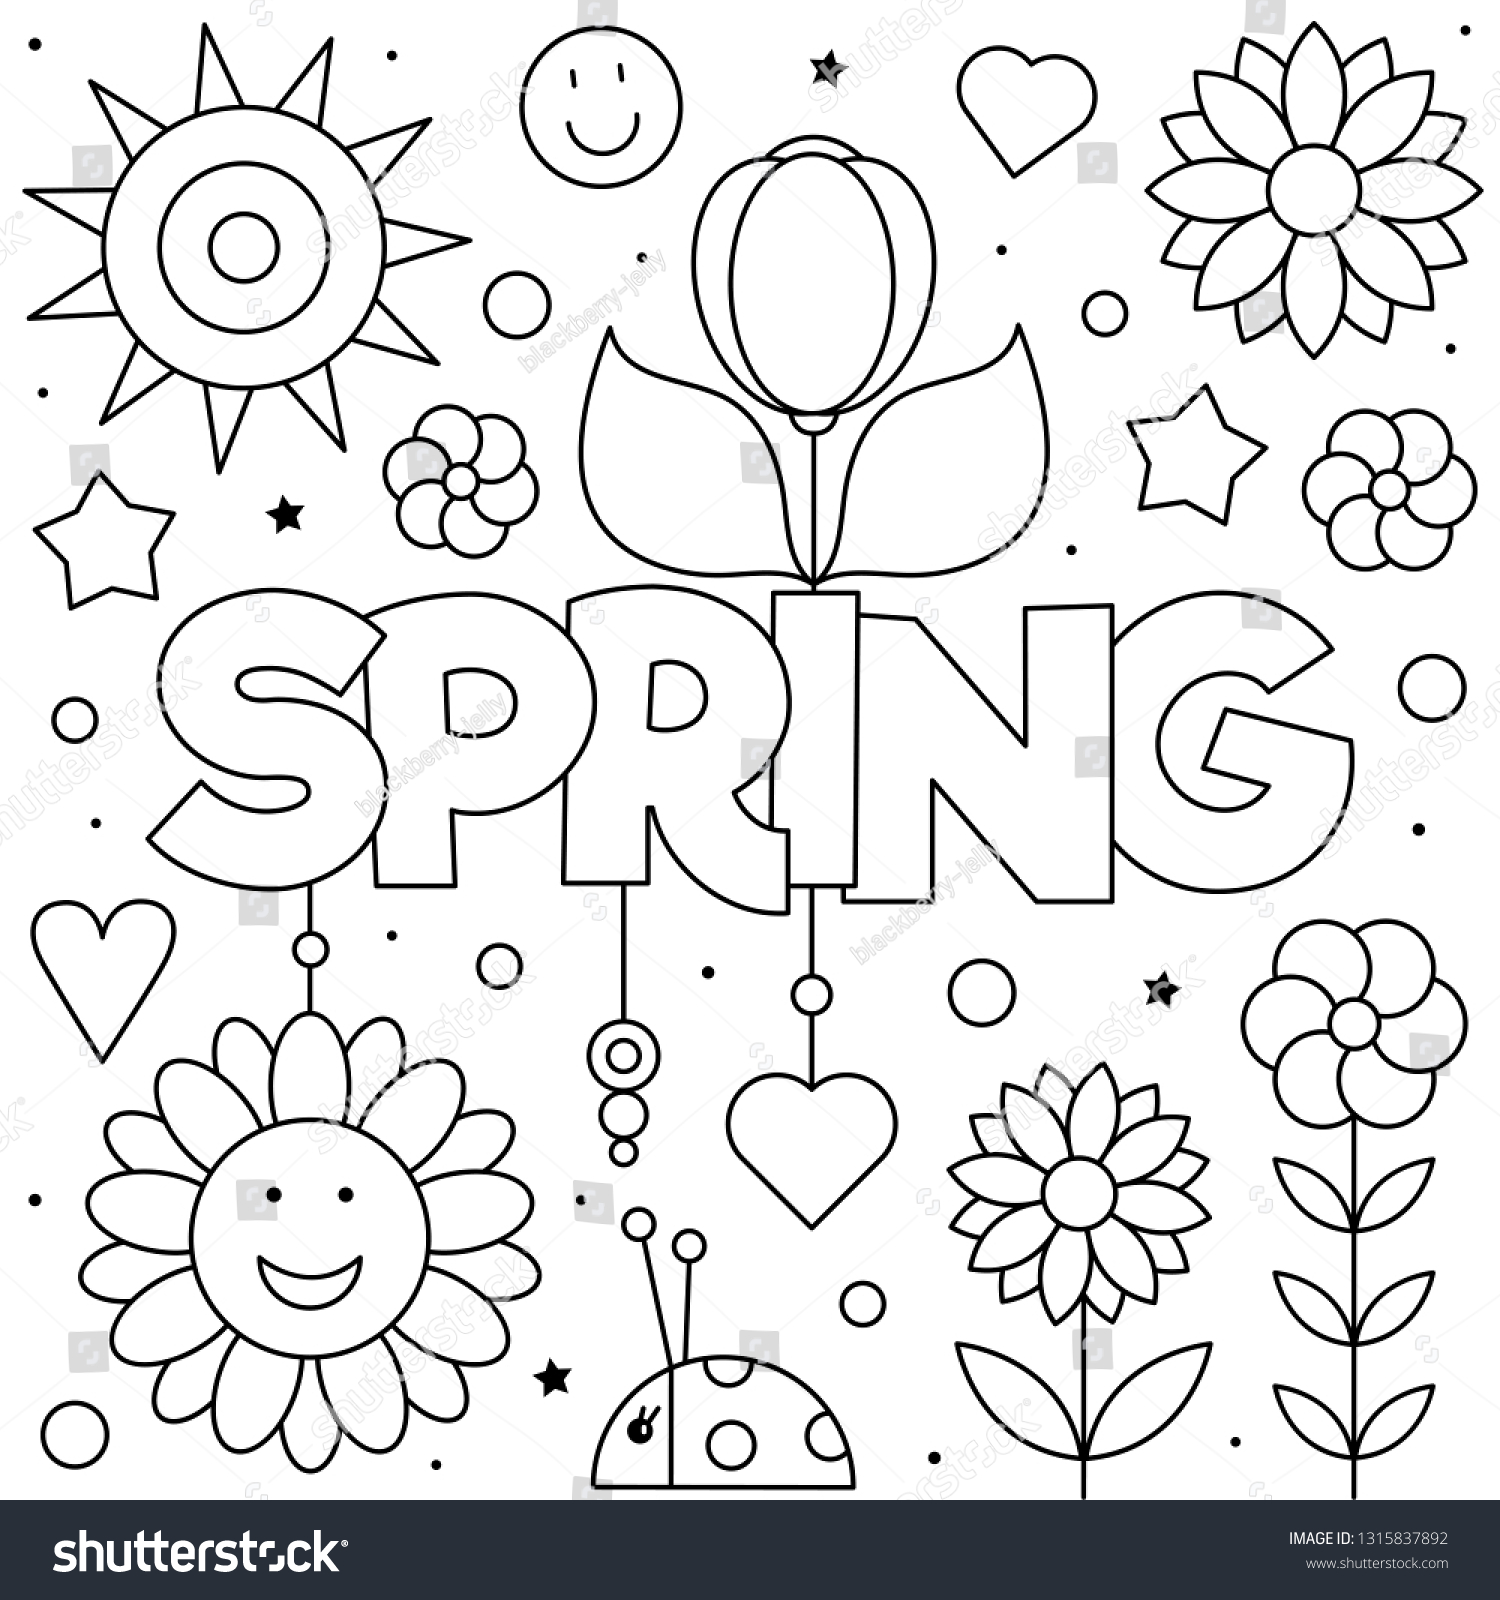 Coloring Page Vector Illustration Flowers Spring Stock Vector (Royalty ...